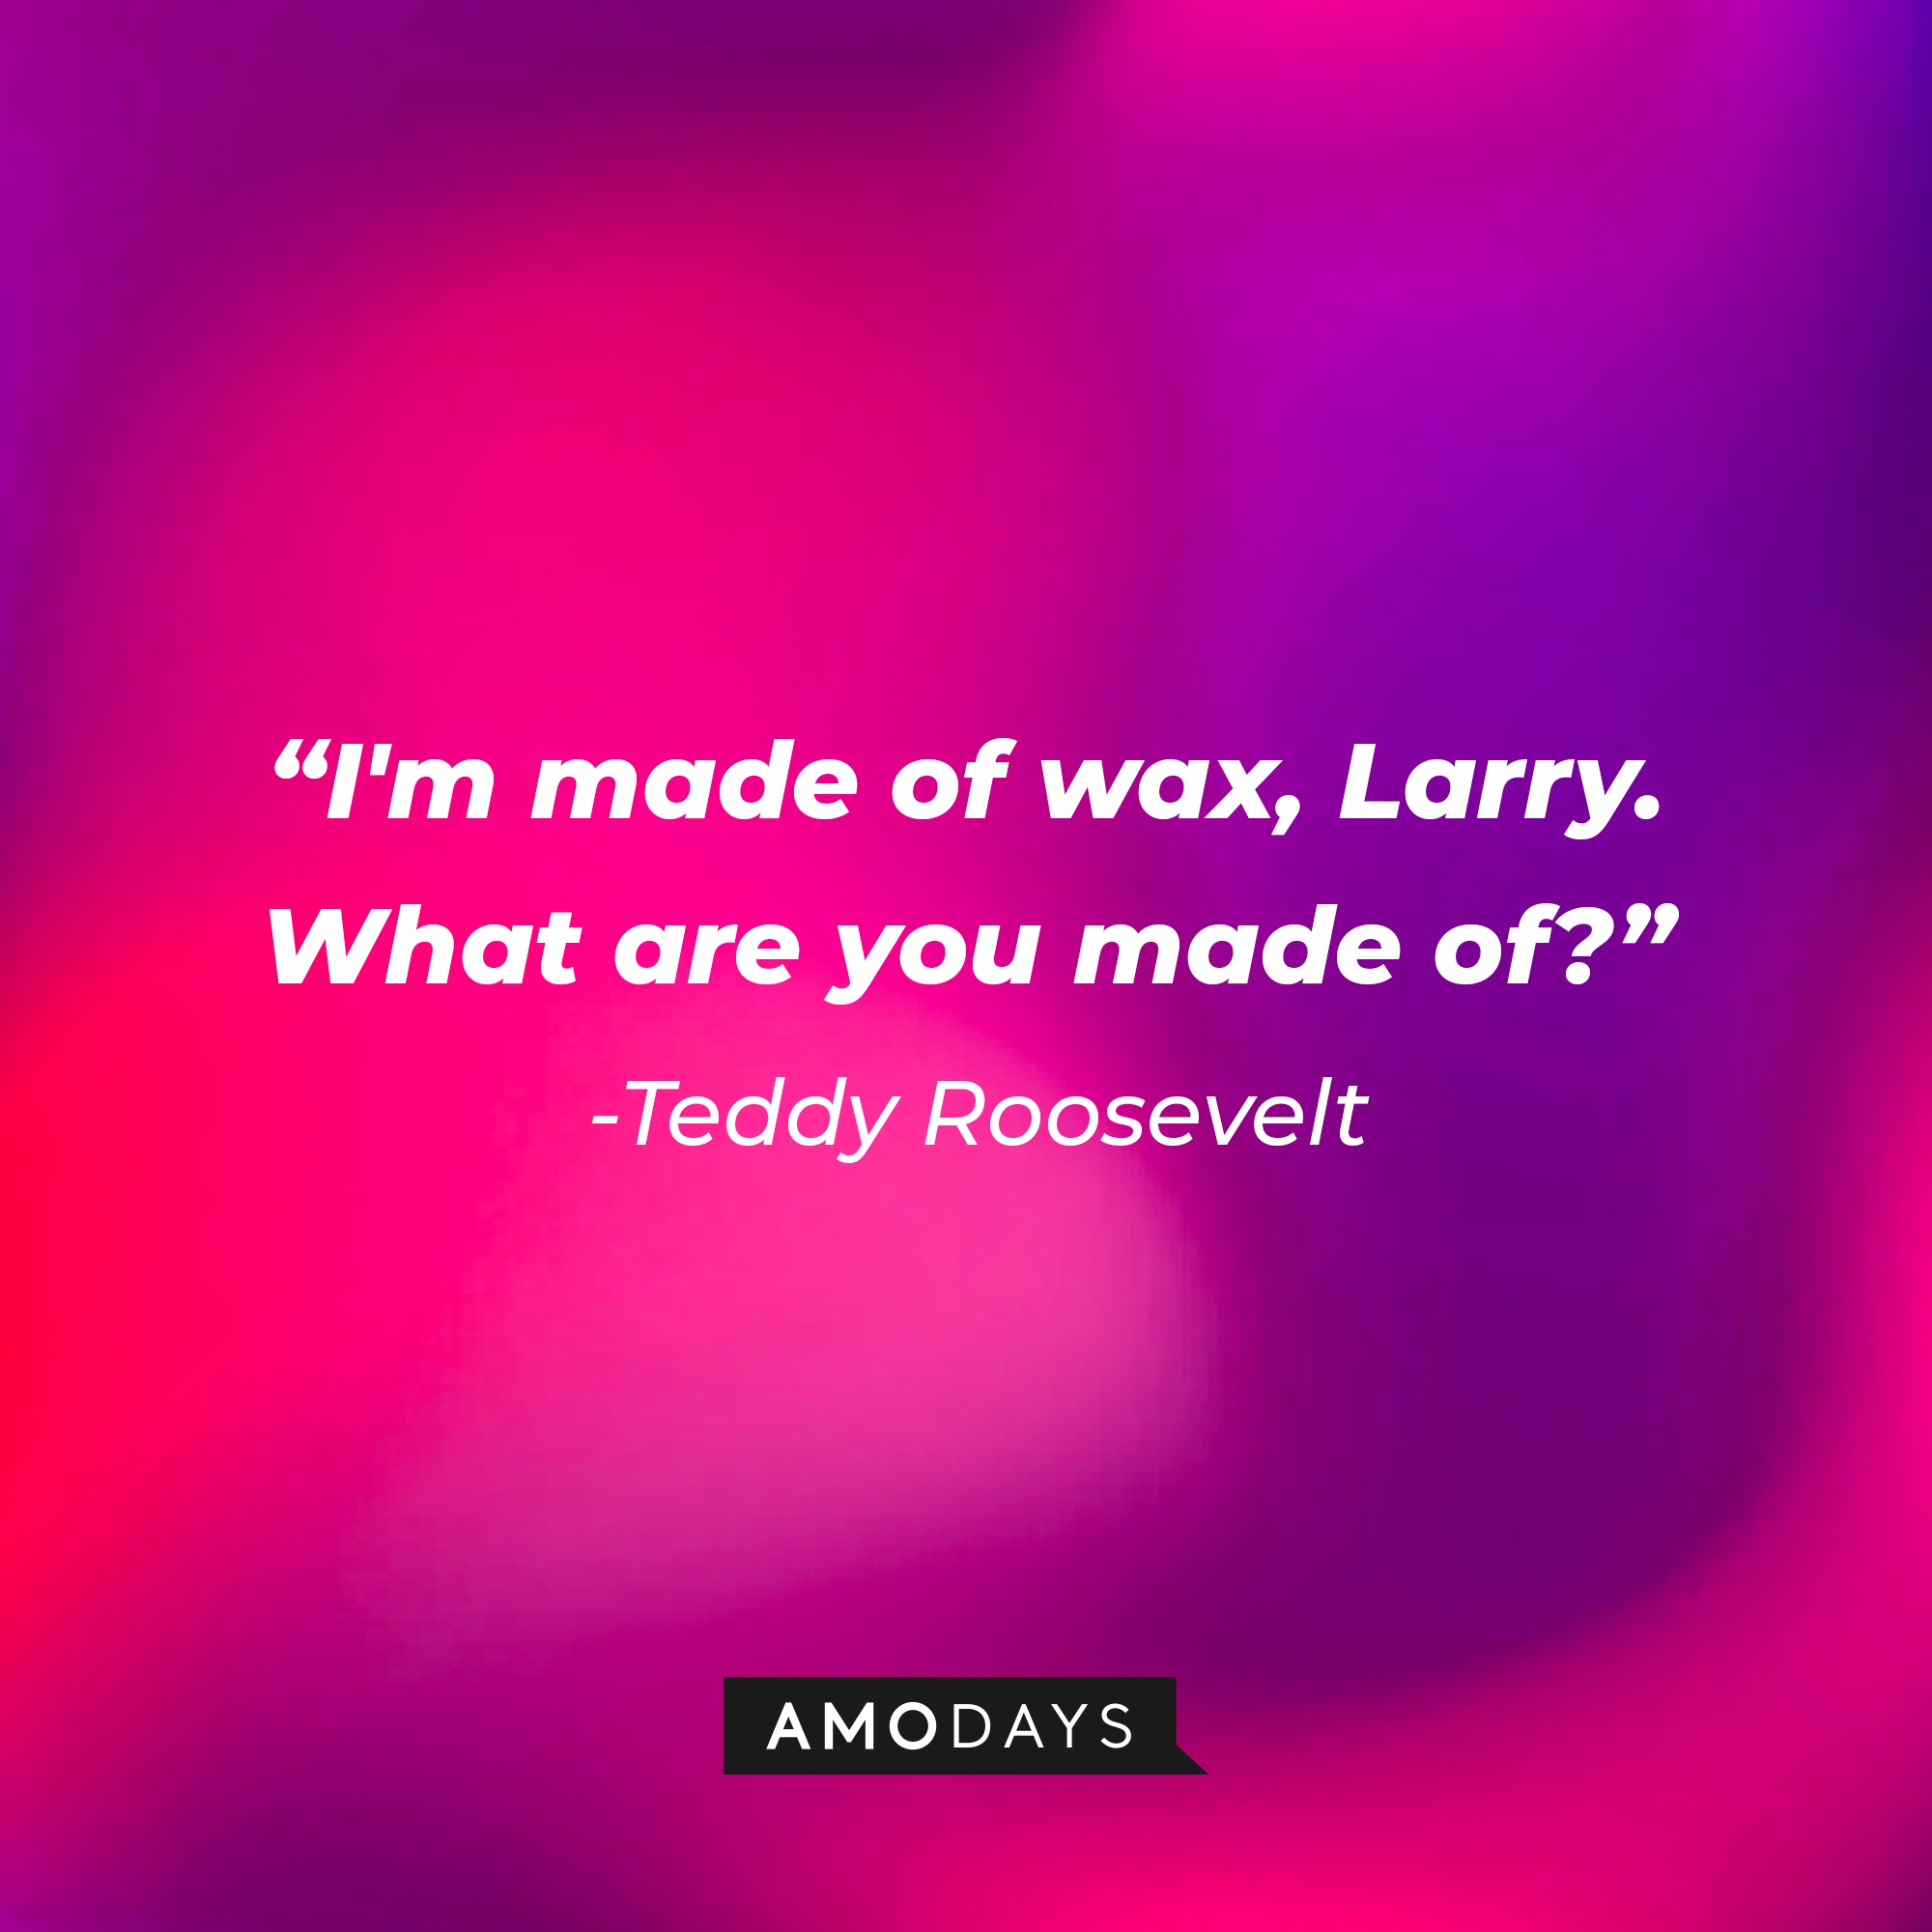 Teddy Roosevelt's quote: “I'm made of wax, Larry. What are you made of?” | Source: Amodays